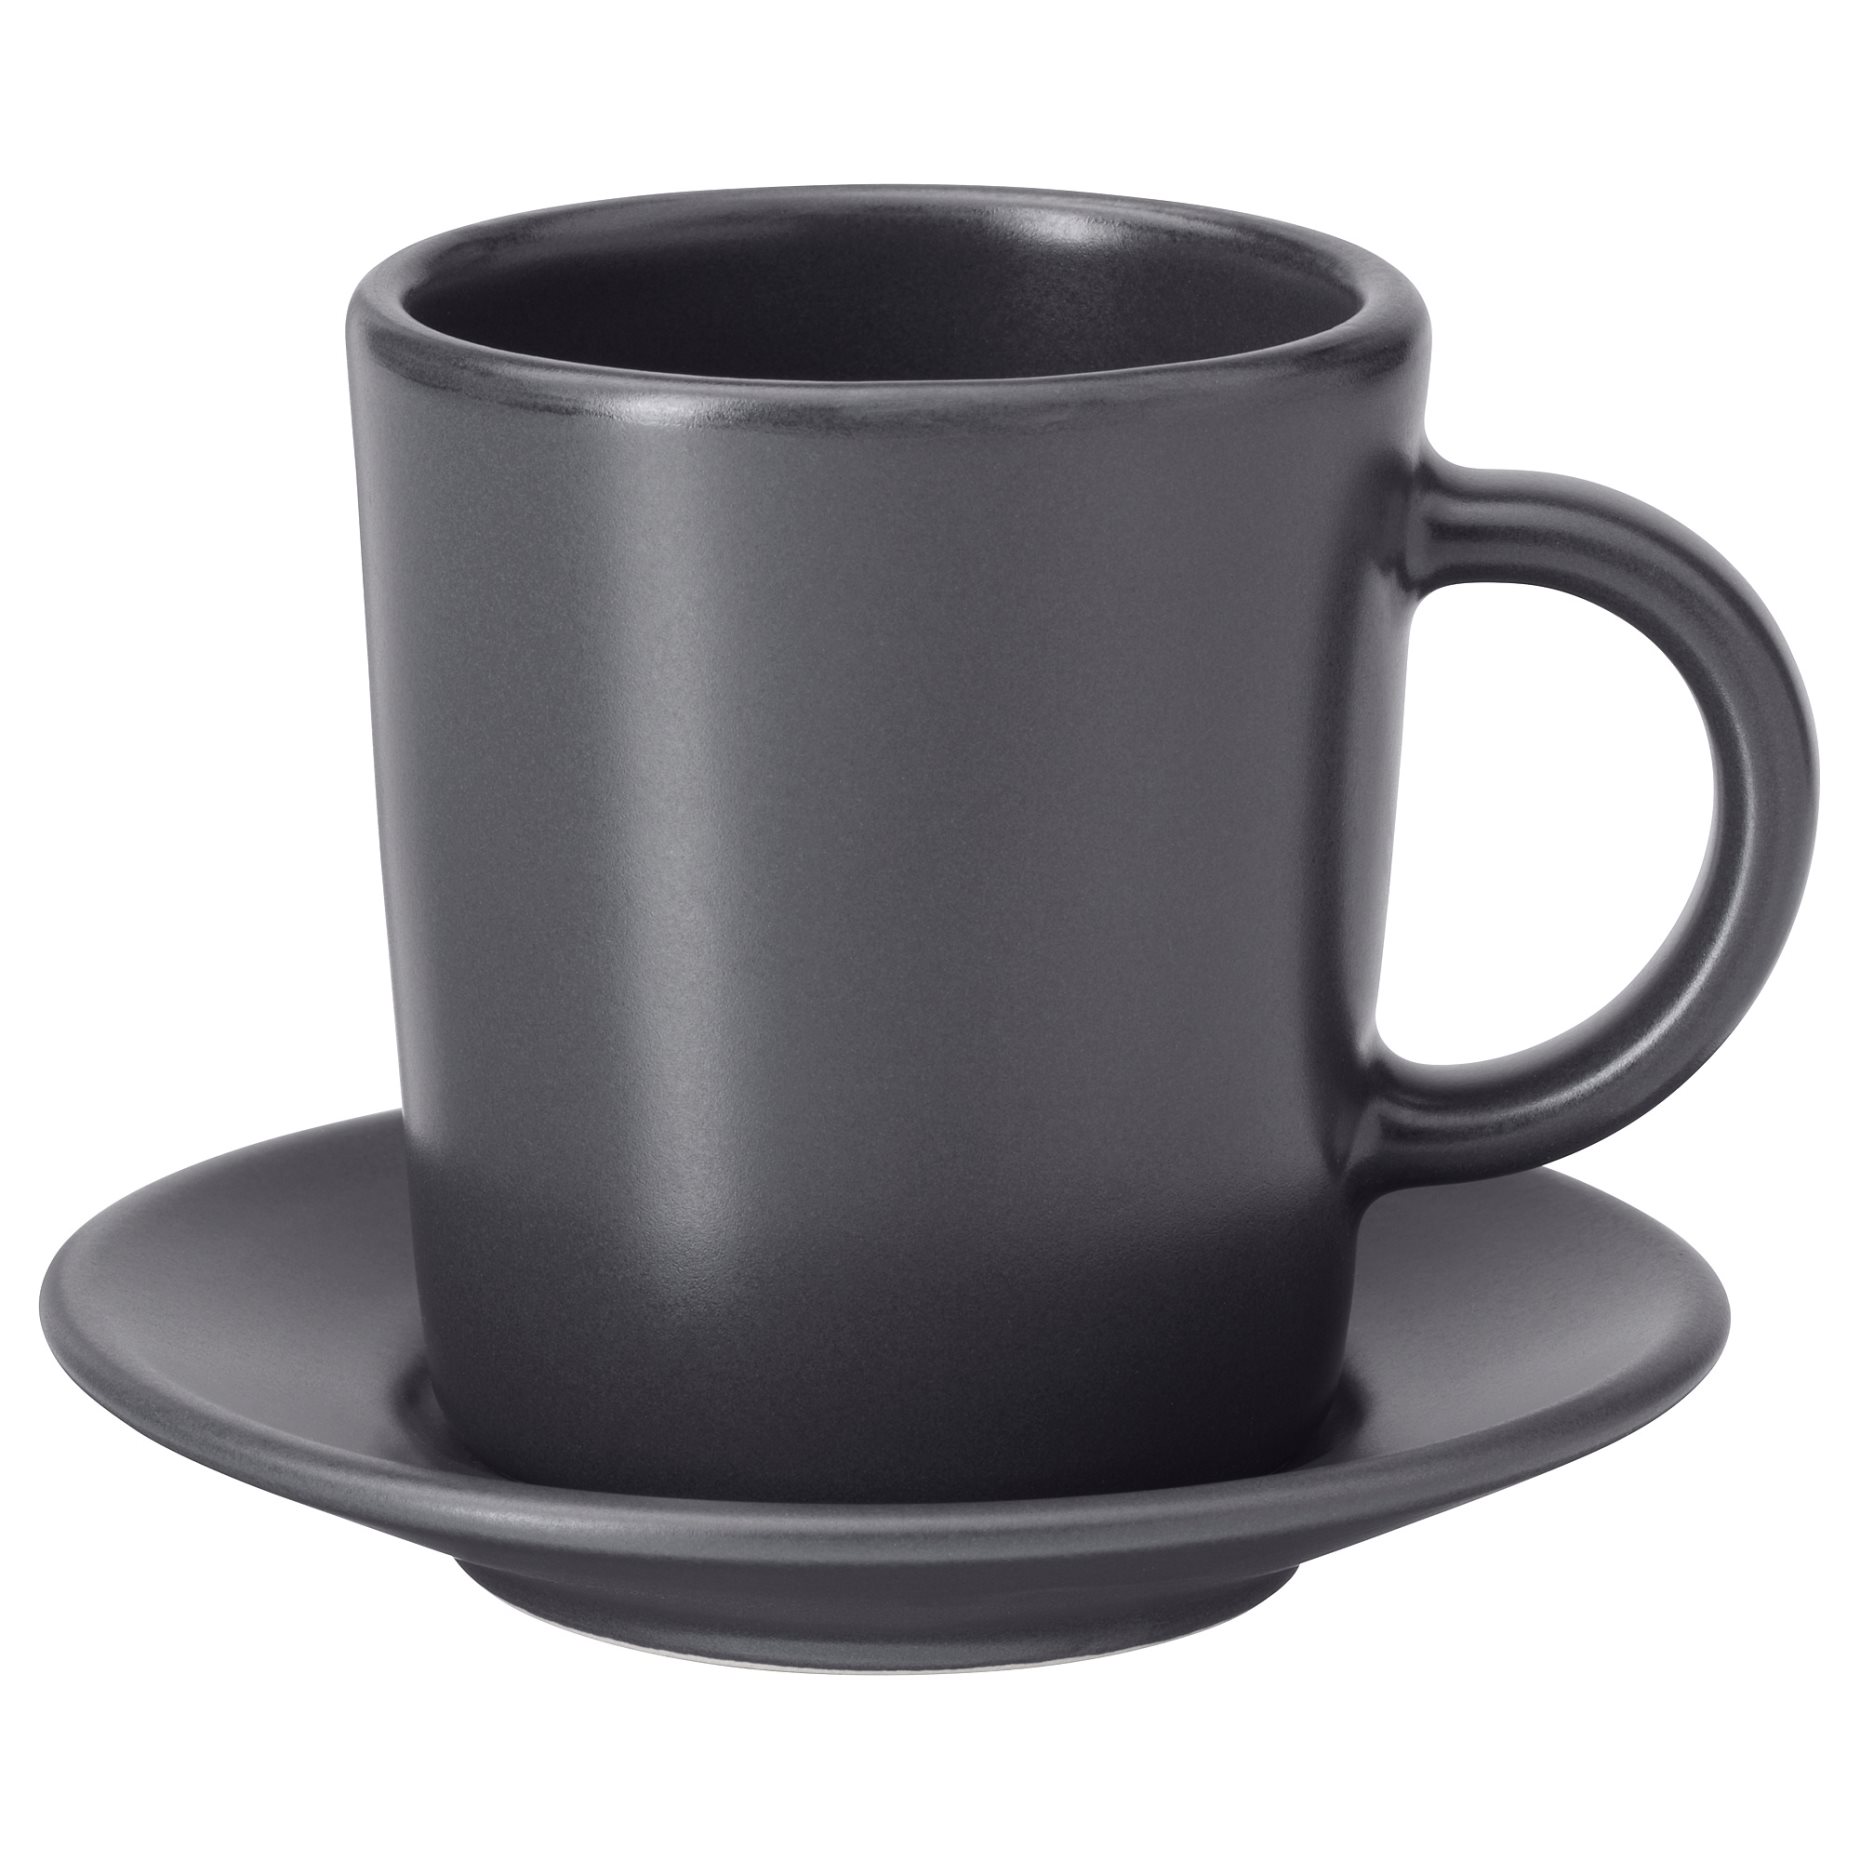 DINERA, espresso cup and saucer, 603.628.09